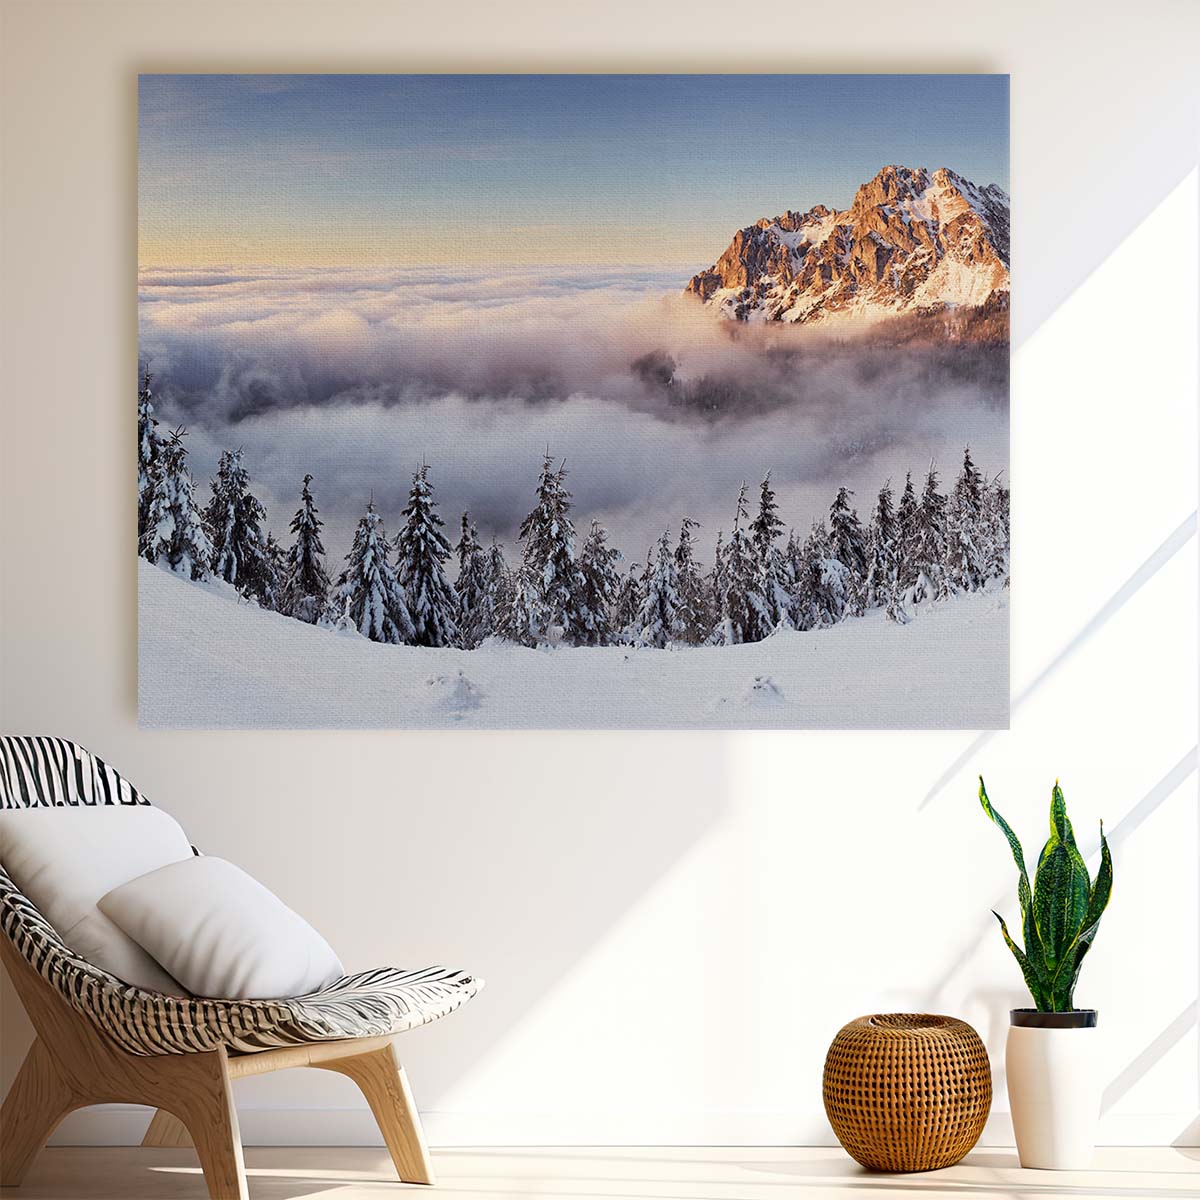 Majestic Mala Fatra Snow Peaks Panoramic Wall Art by Luxuriance Designs. Made in USA.